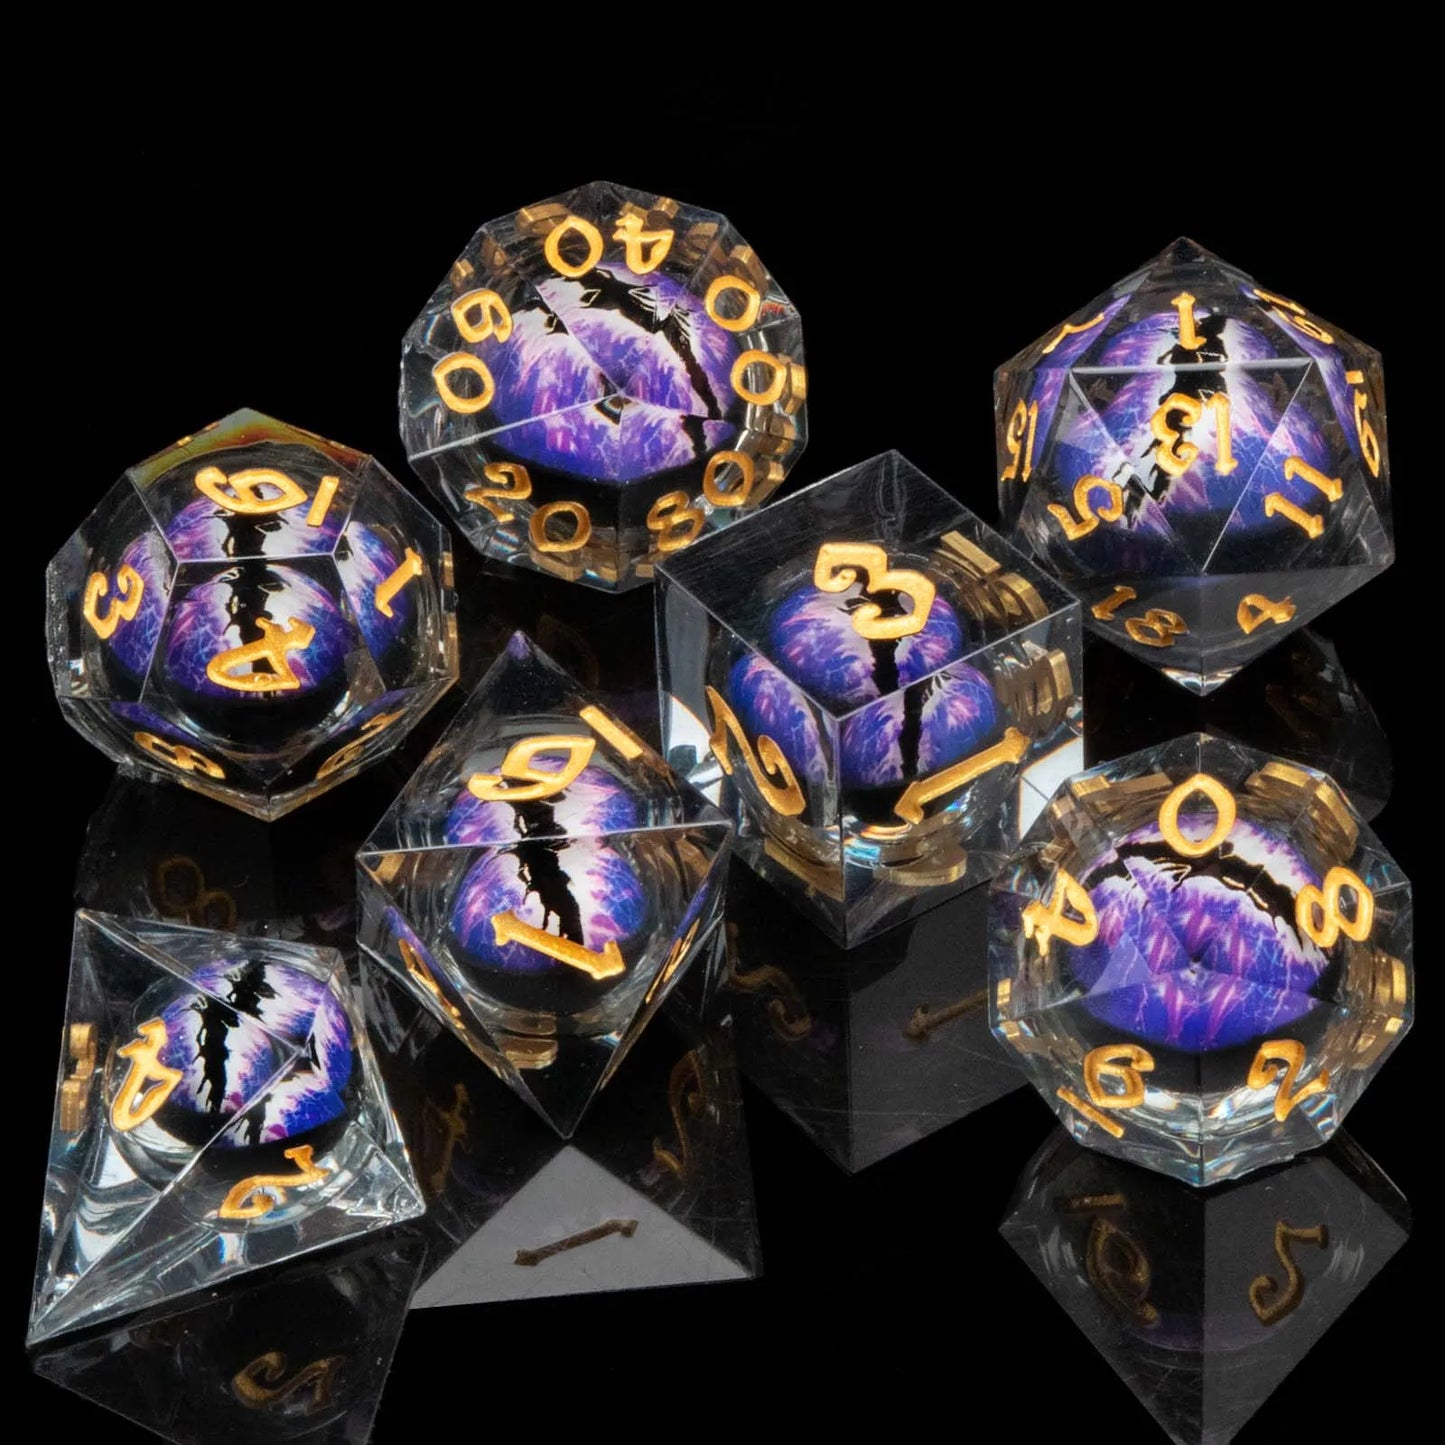 D and D Flowing Sand Sharp Edge Dragon Eye Dnd Resin RPG Polyhedral D&D Dice Set For Dungeon and Dragon Pathfinder Role Playing AZ15